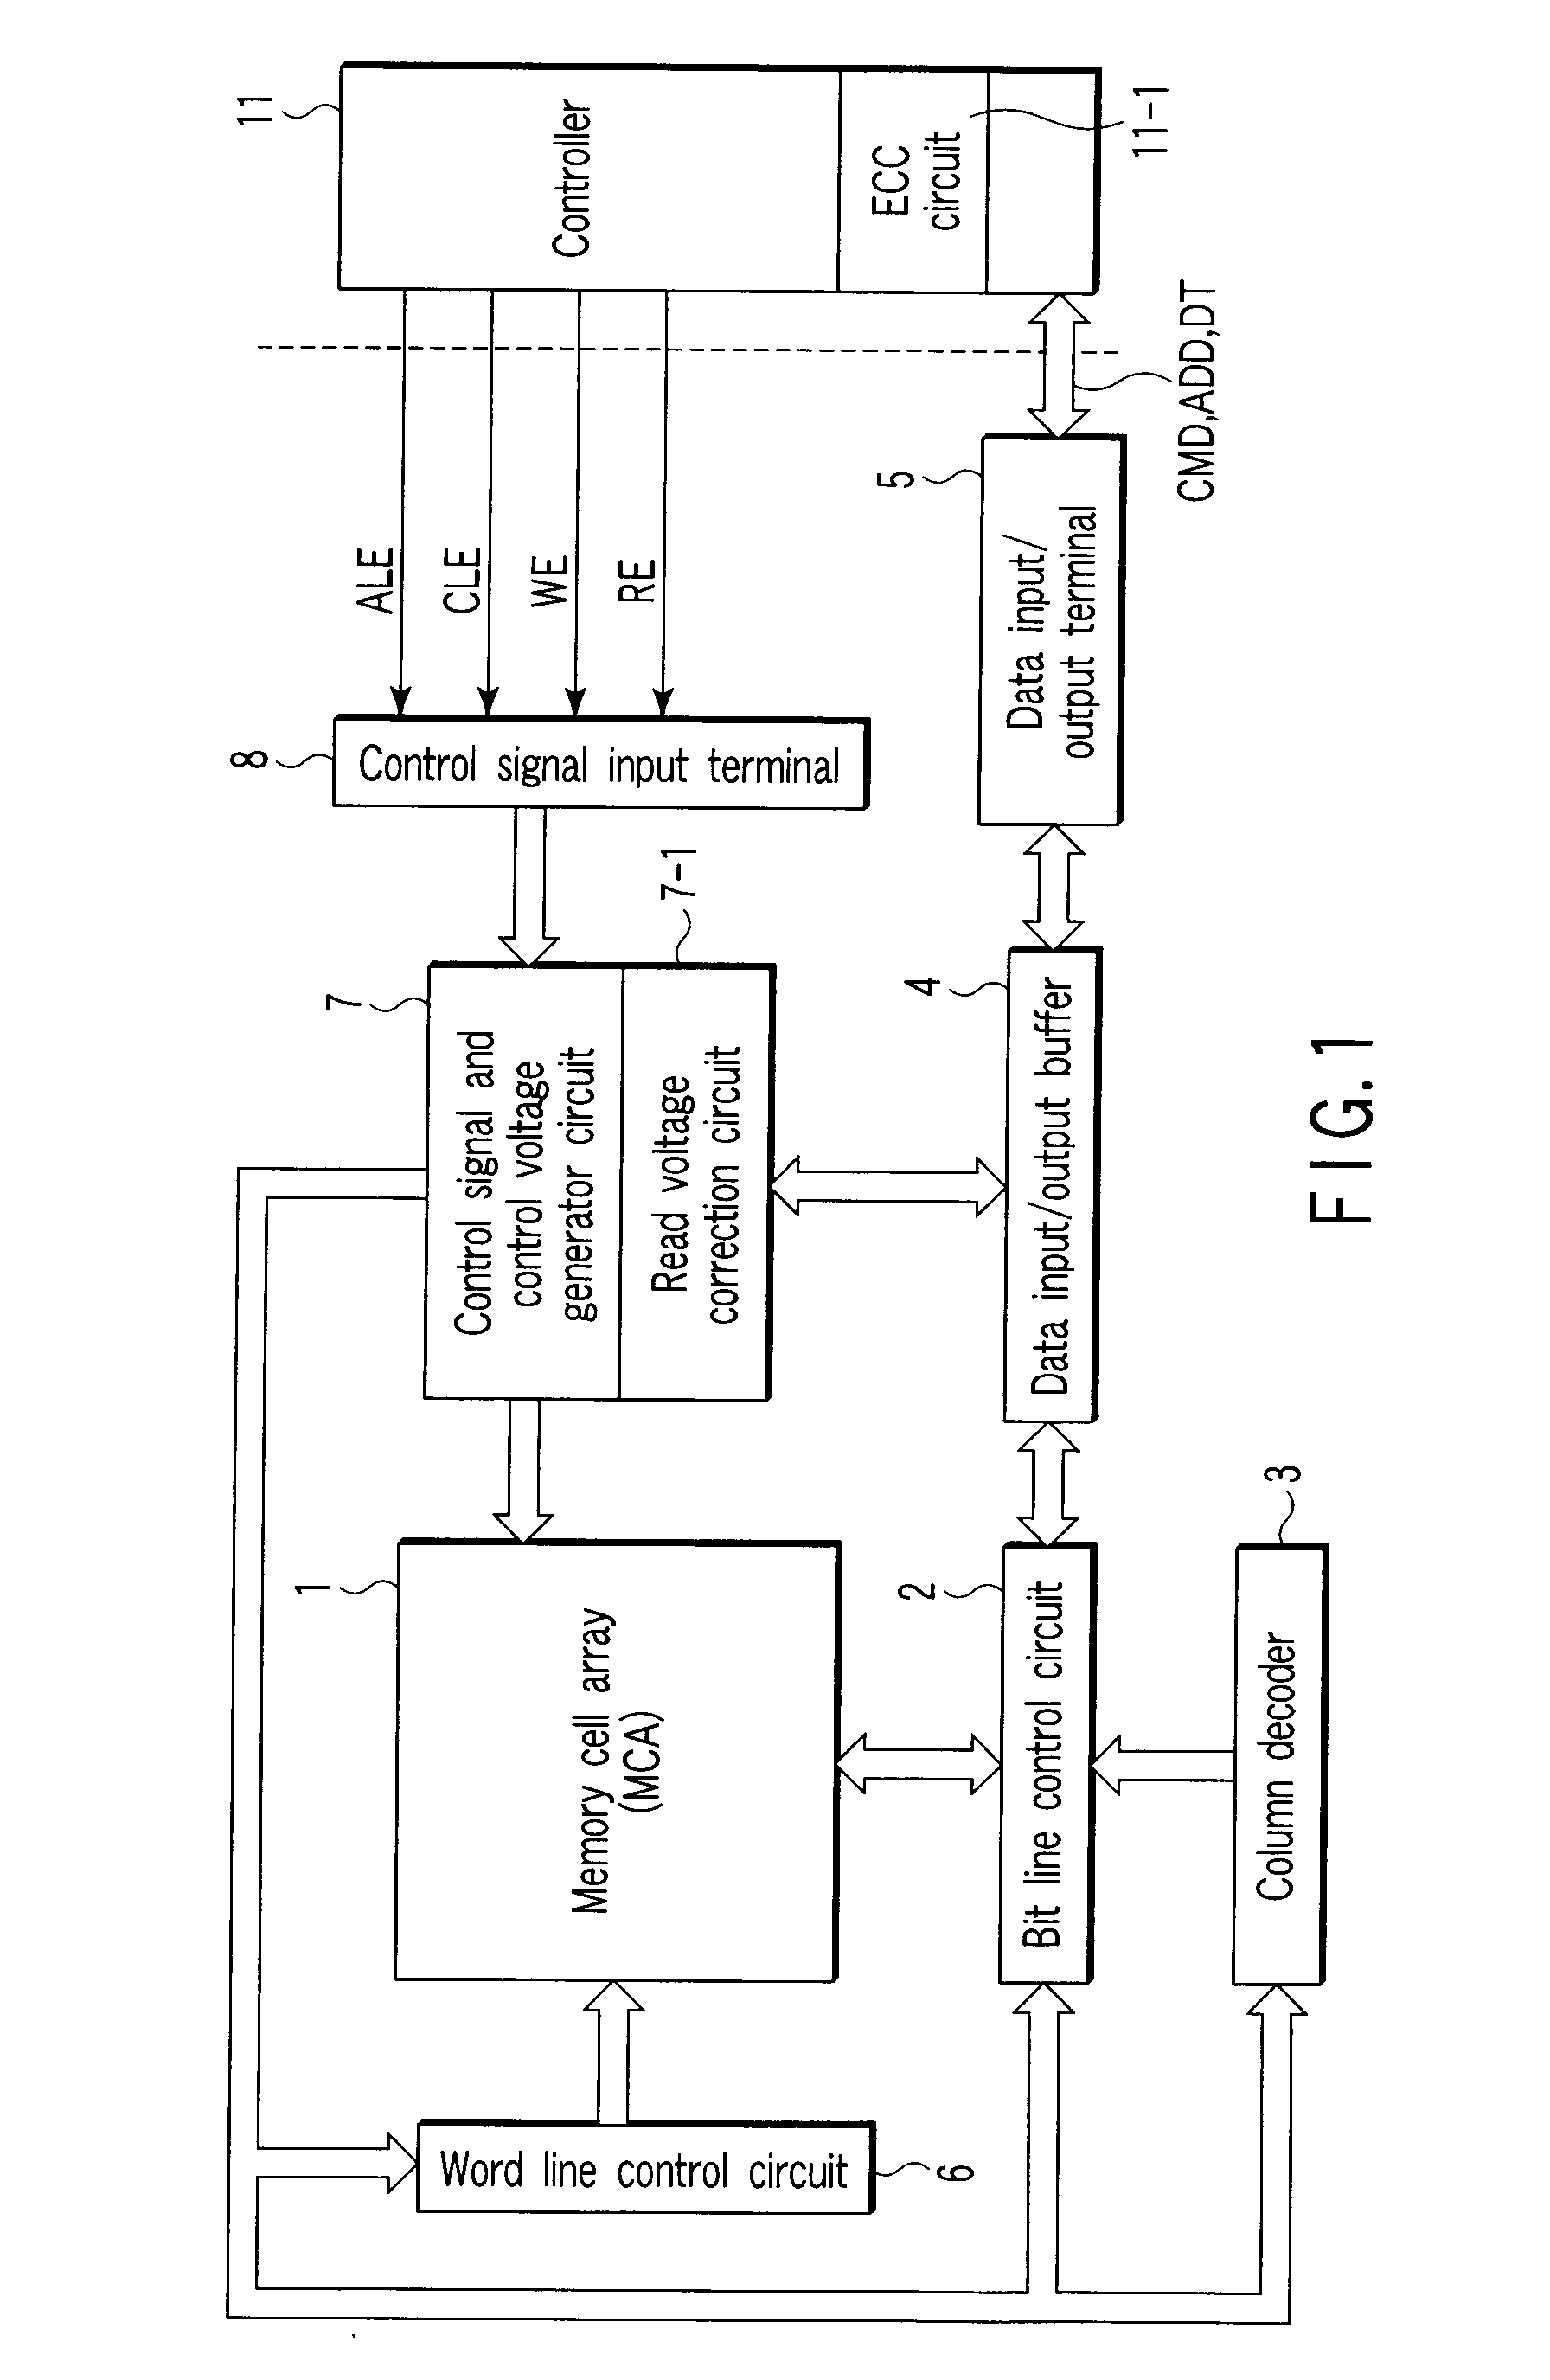 Semiconductor memory device capable of correcting a read level properly